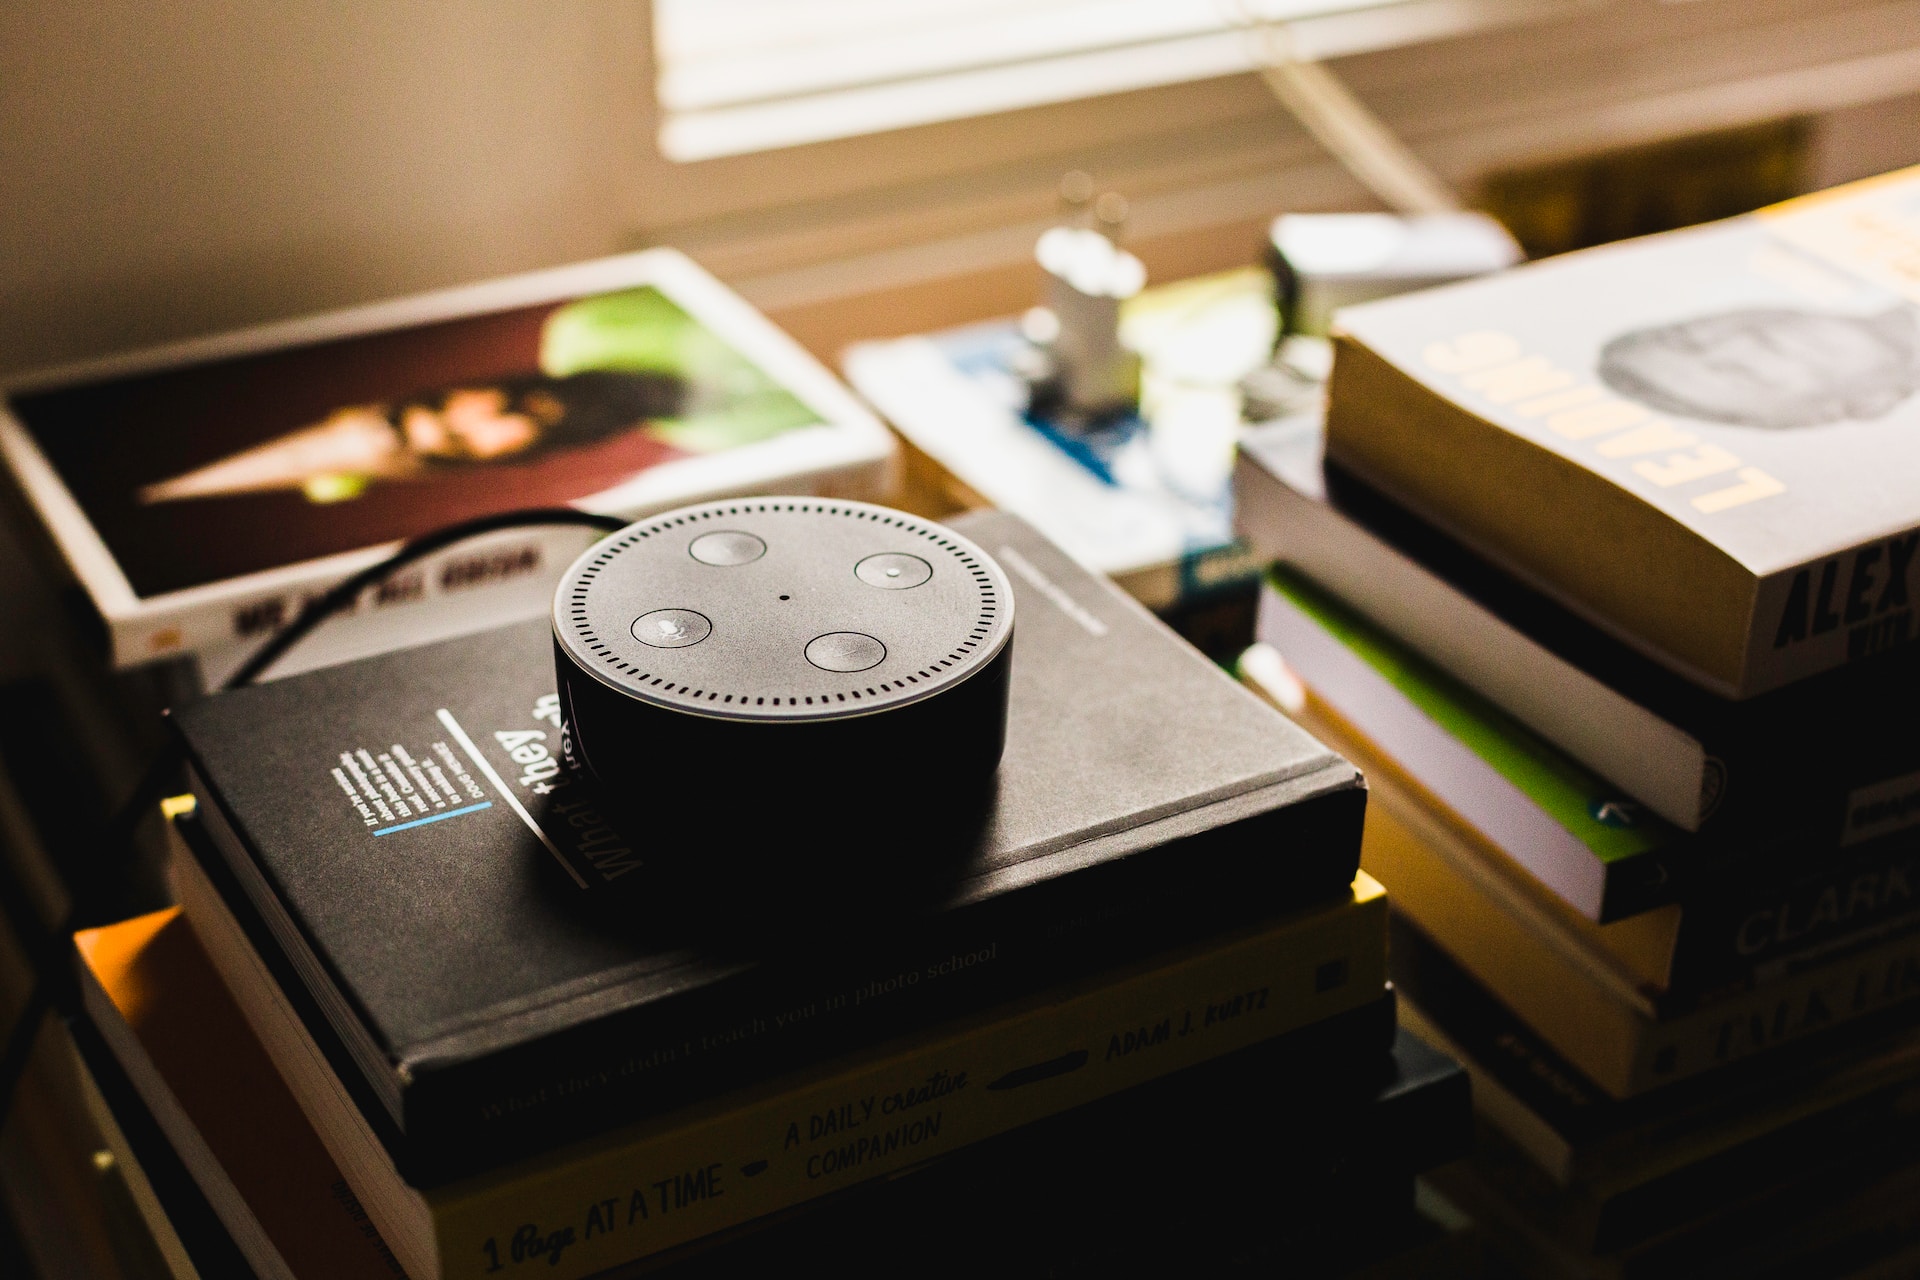 An Alexa on top of some books.